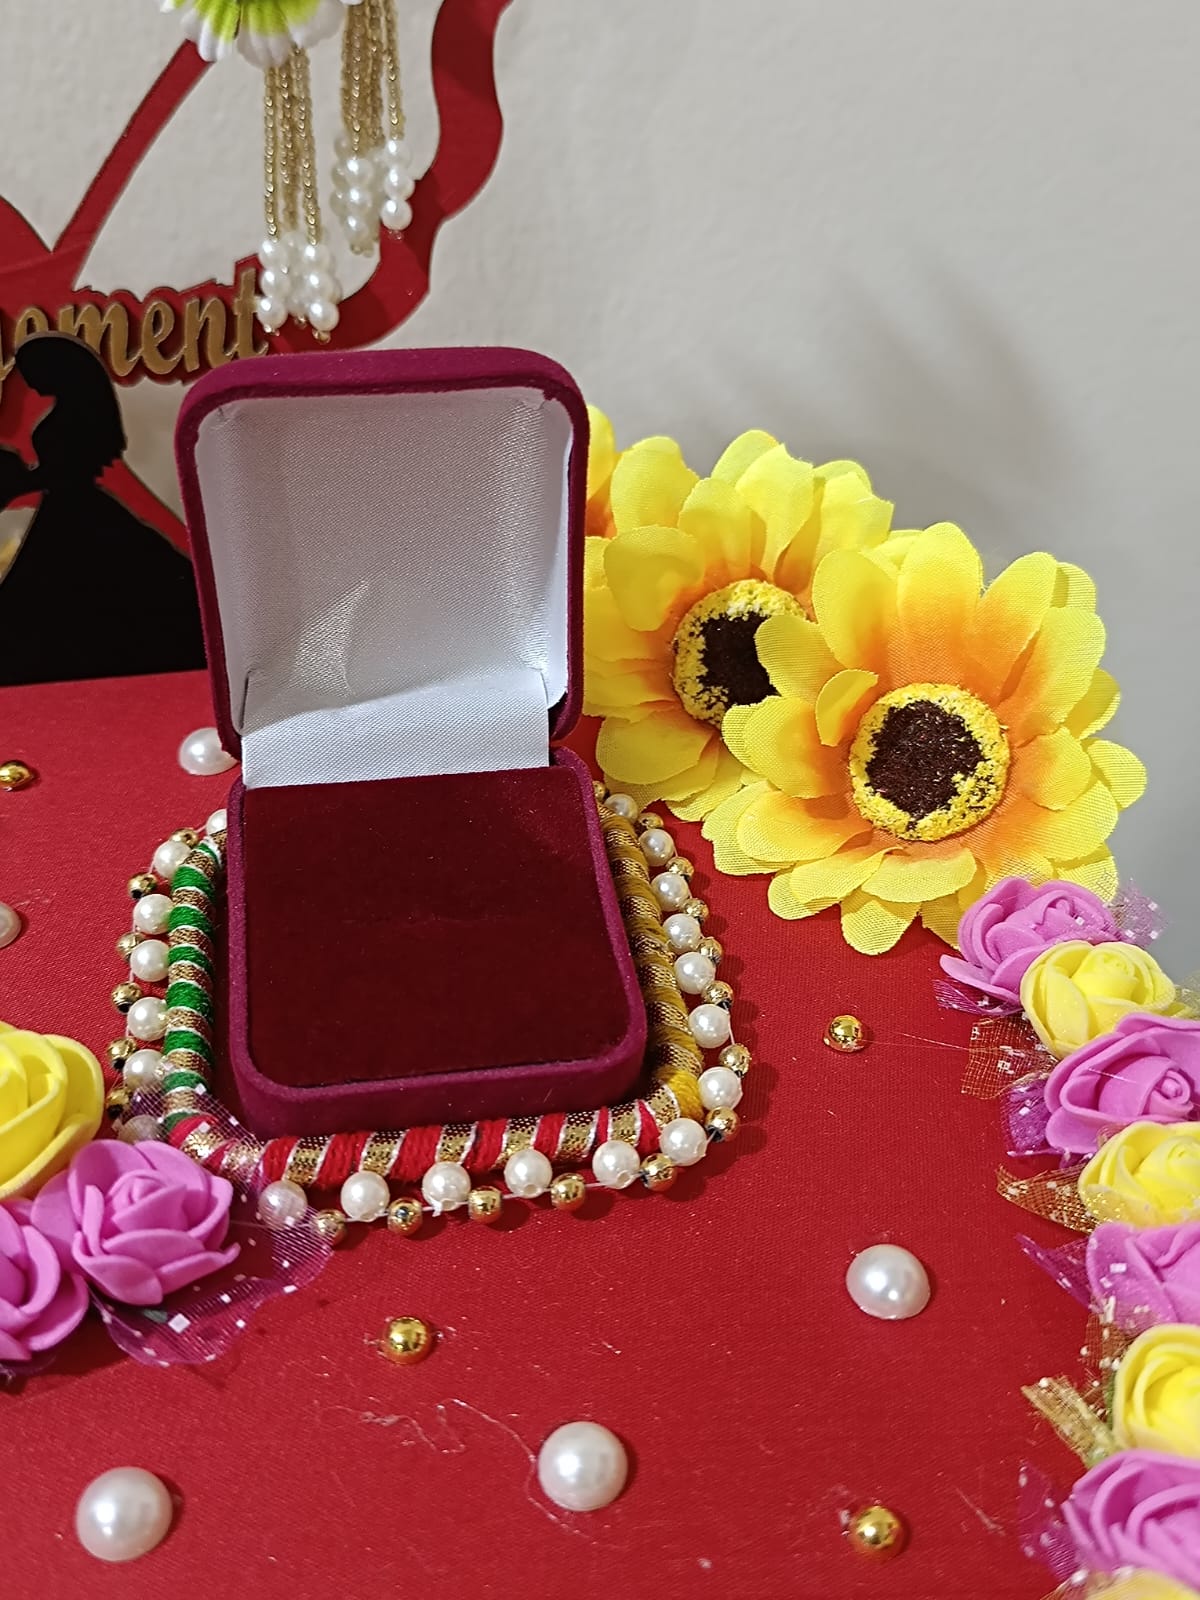 Engagement | Ring Tray | Ring Platter | Wedding | Art&Craft  (@engagement_ring_tray_platter) • Instagram photos and videos